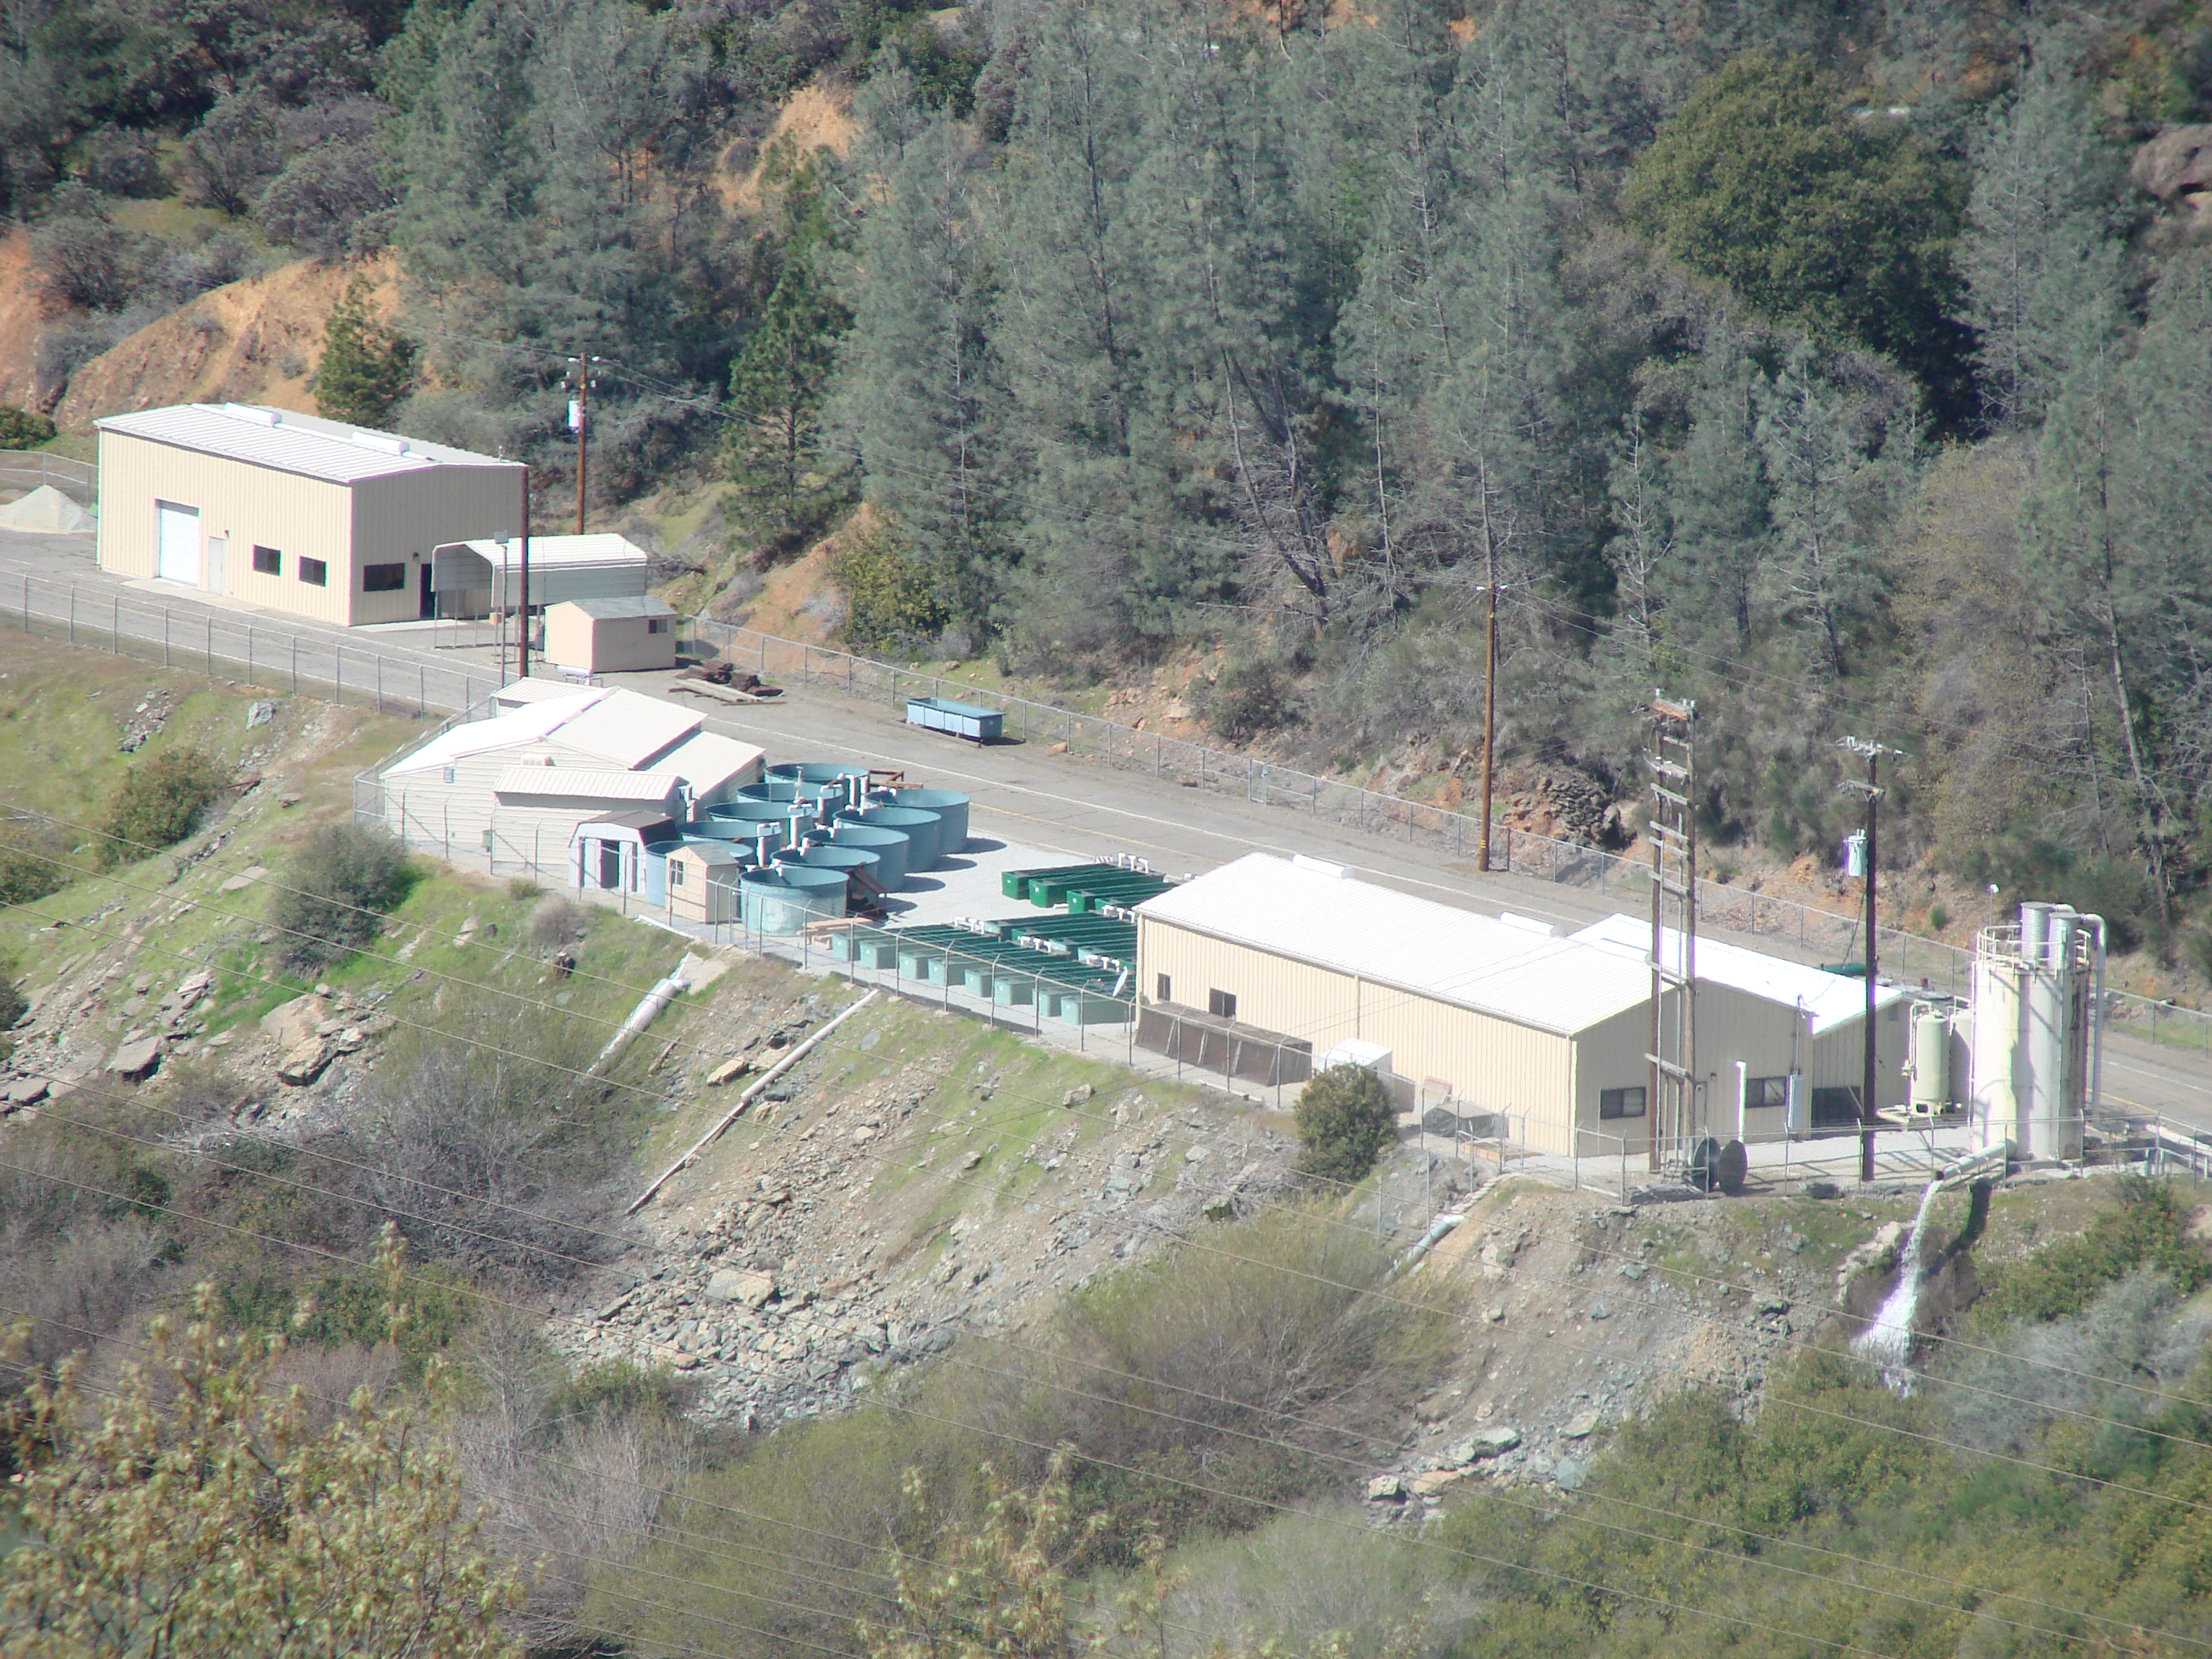 Overhead shot of Livingston Stone National Fish Hatchery.  Photo includes tan buildings and large green circular and rectangular tanks.  